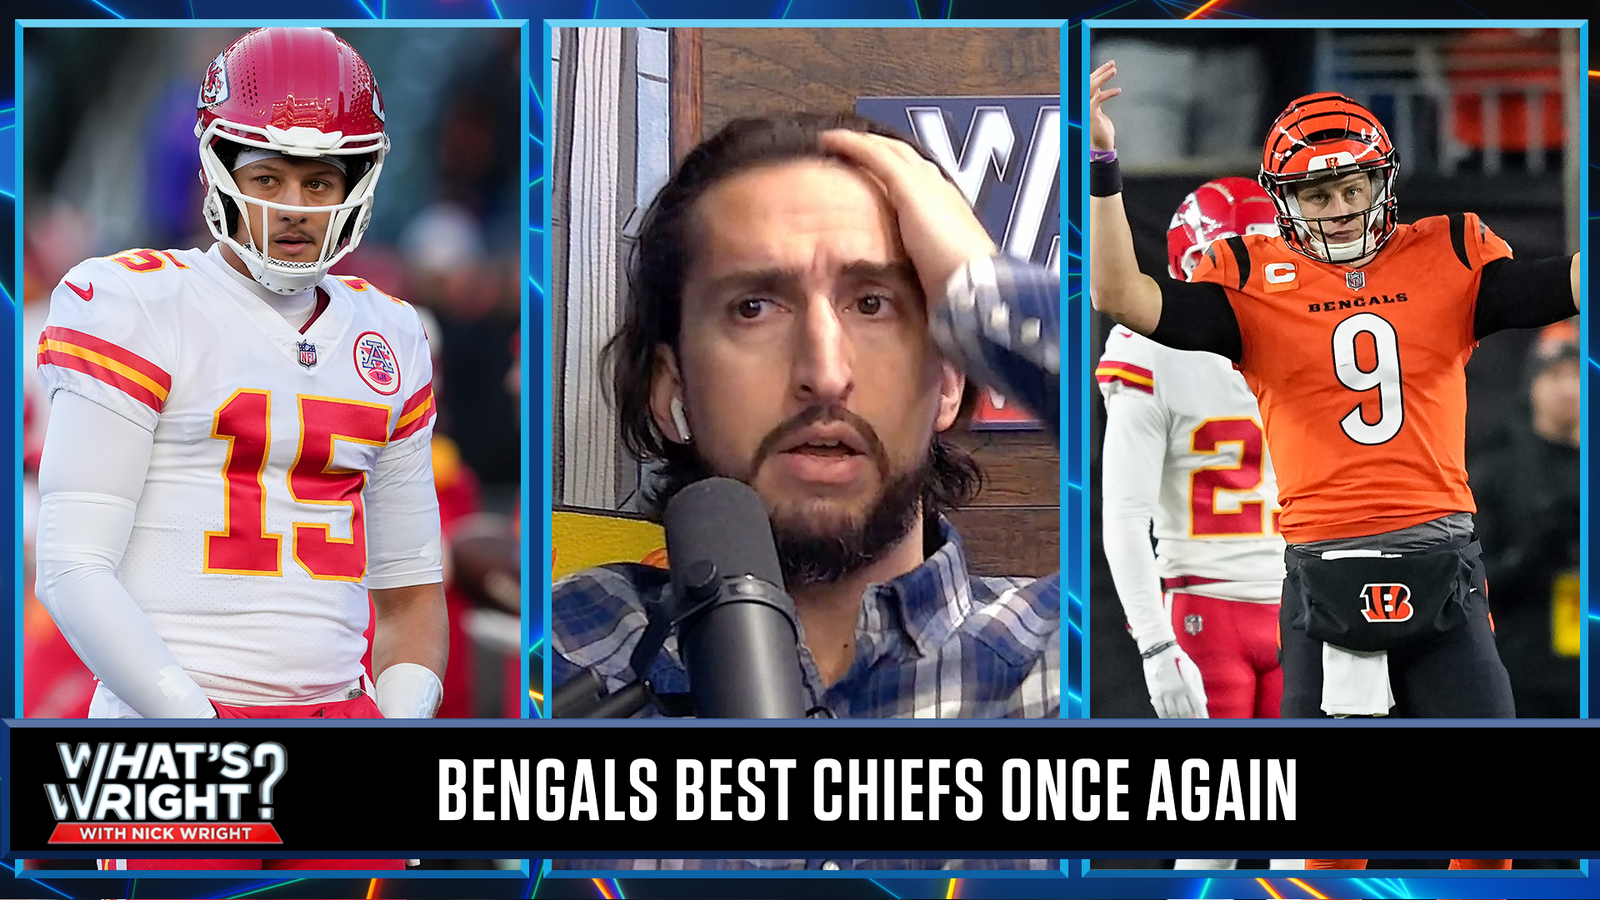 Nick Wright shares the low points from Sunday's loss to the Bengals and what it means for the Chiefs to finally have a legitimate AFC rival.